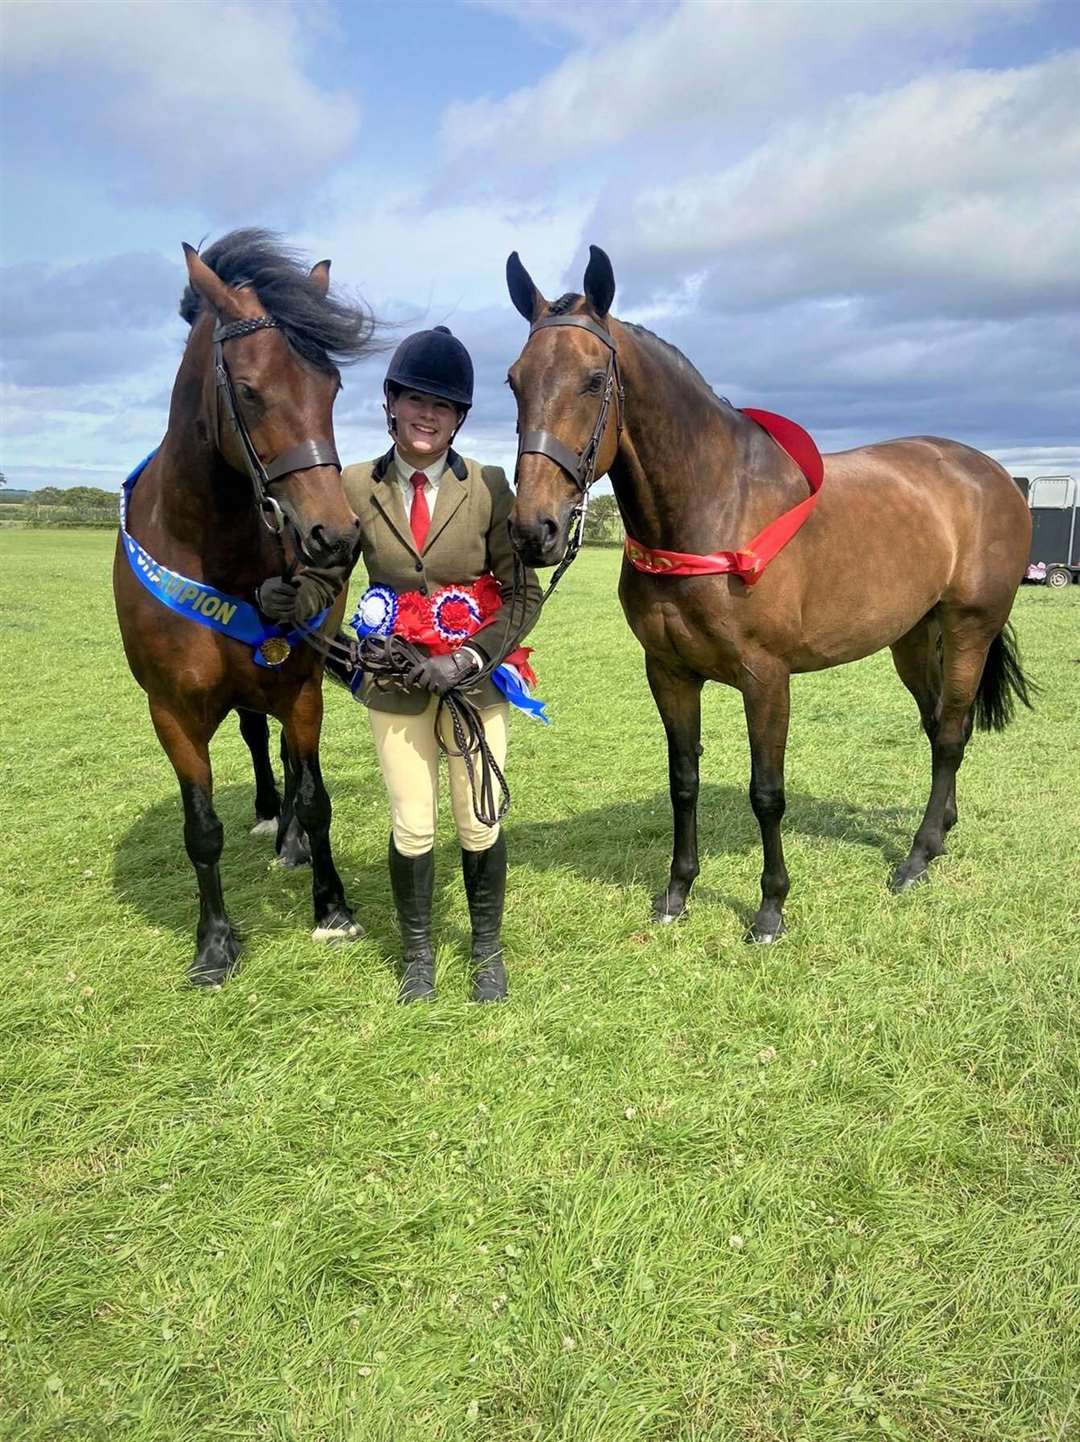 It was a double triumph for Morven Mackenzie in the inhand ring as she scooped both the championship title and the reserve with her two horses – Atlantic Tiffany (right) and Llynhelyg Lady Cilla.